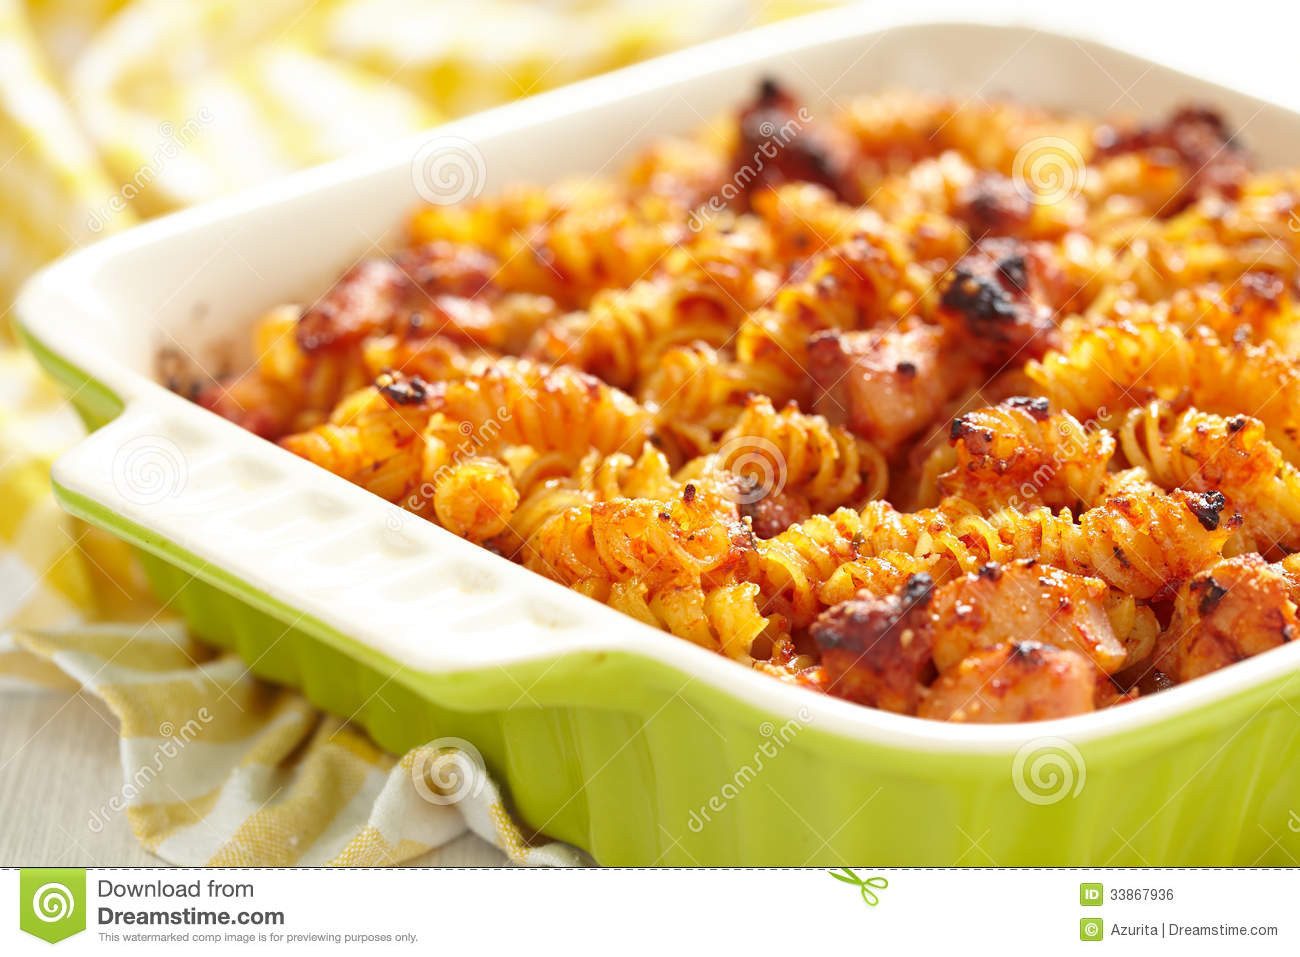 Baked Macaroni And Cheese With Tomato
 Baked Macaroni Chicken Cheese And Tomato Sauce Stock